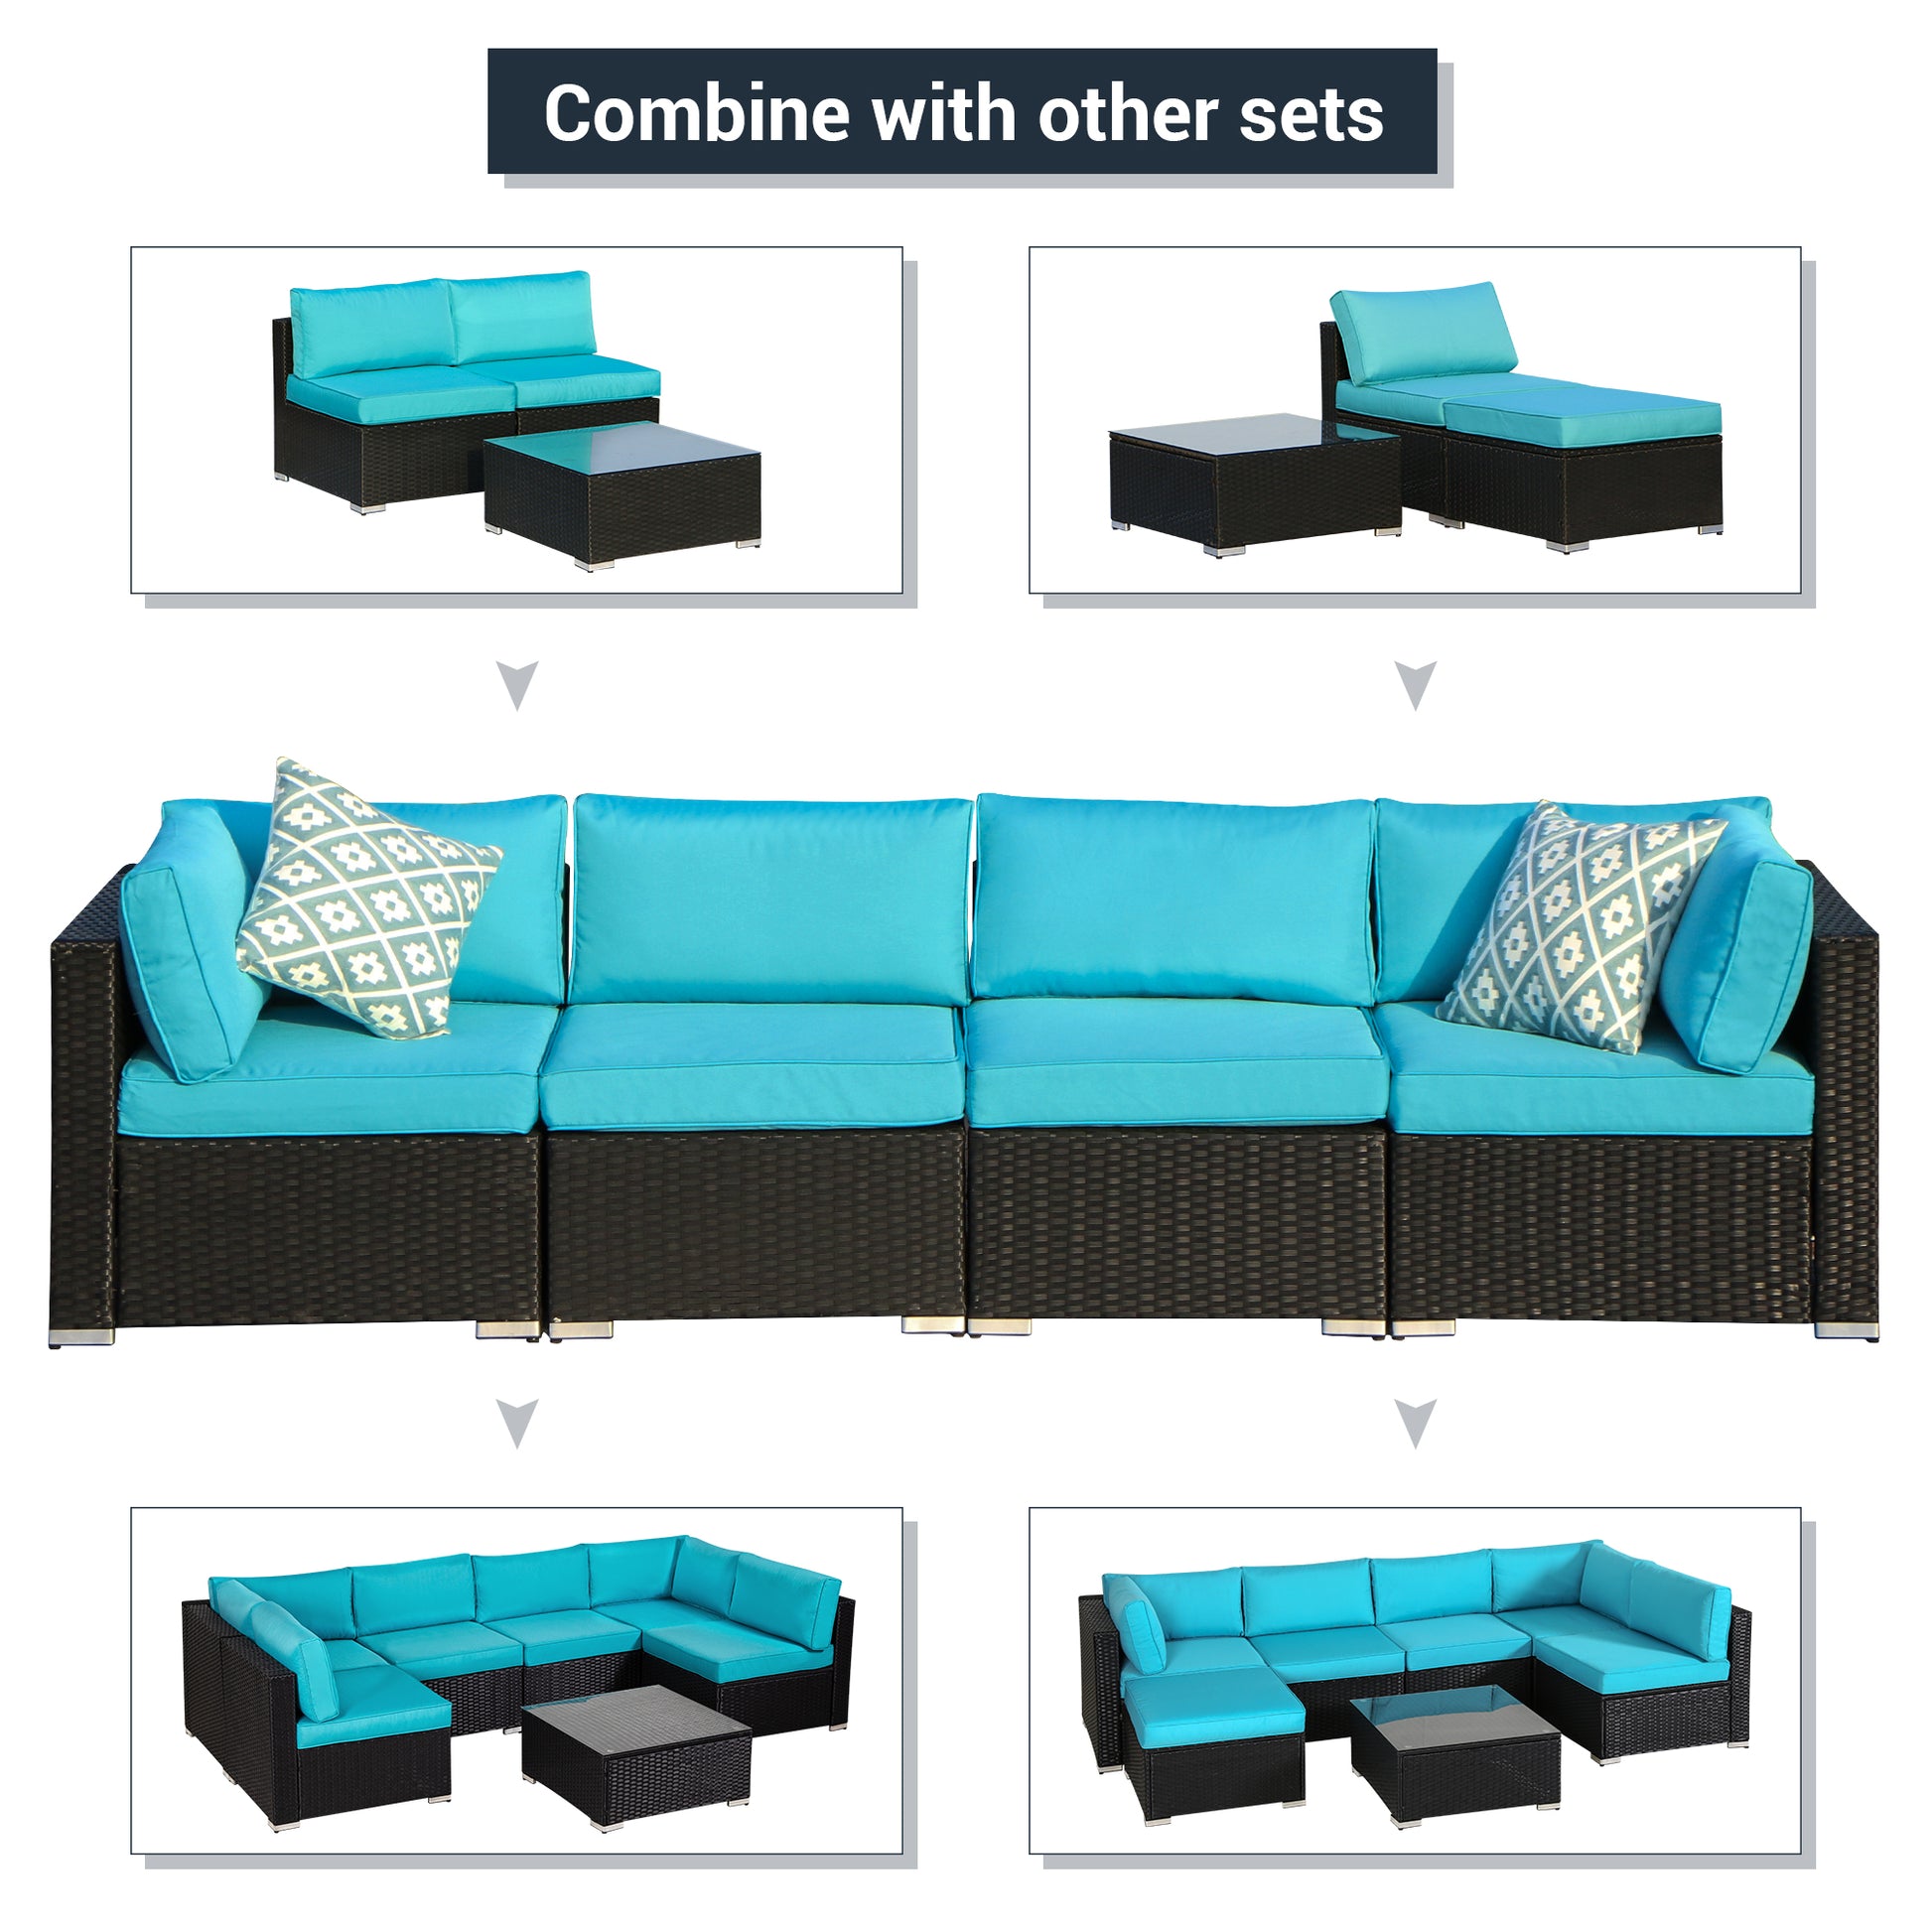 Loveseat Set 4 Pieces All Weather, Turquoise Cushions - Sunvivi